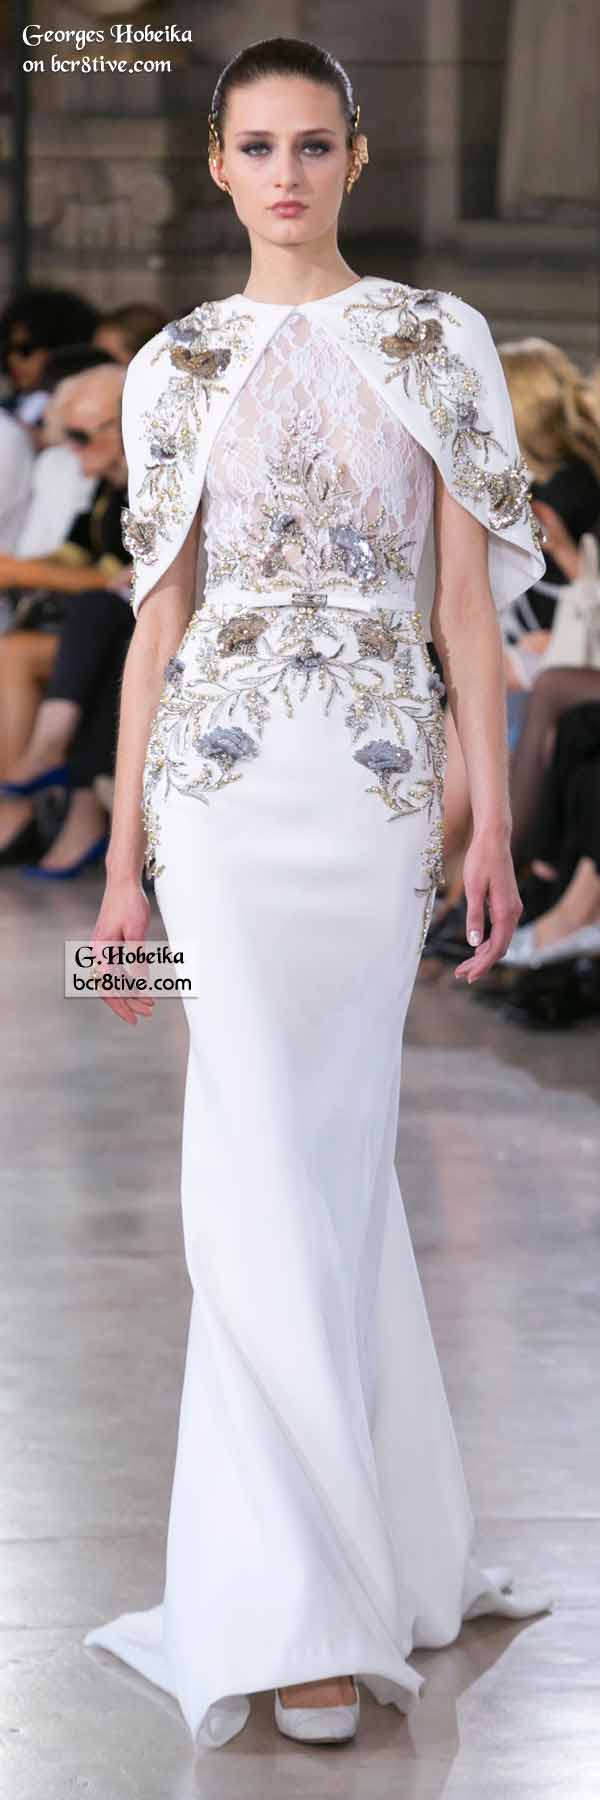 Georges Hobeika Fall 2016 Haute Couture – Page 2 – Be Creative